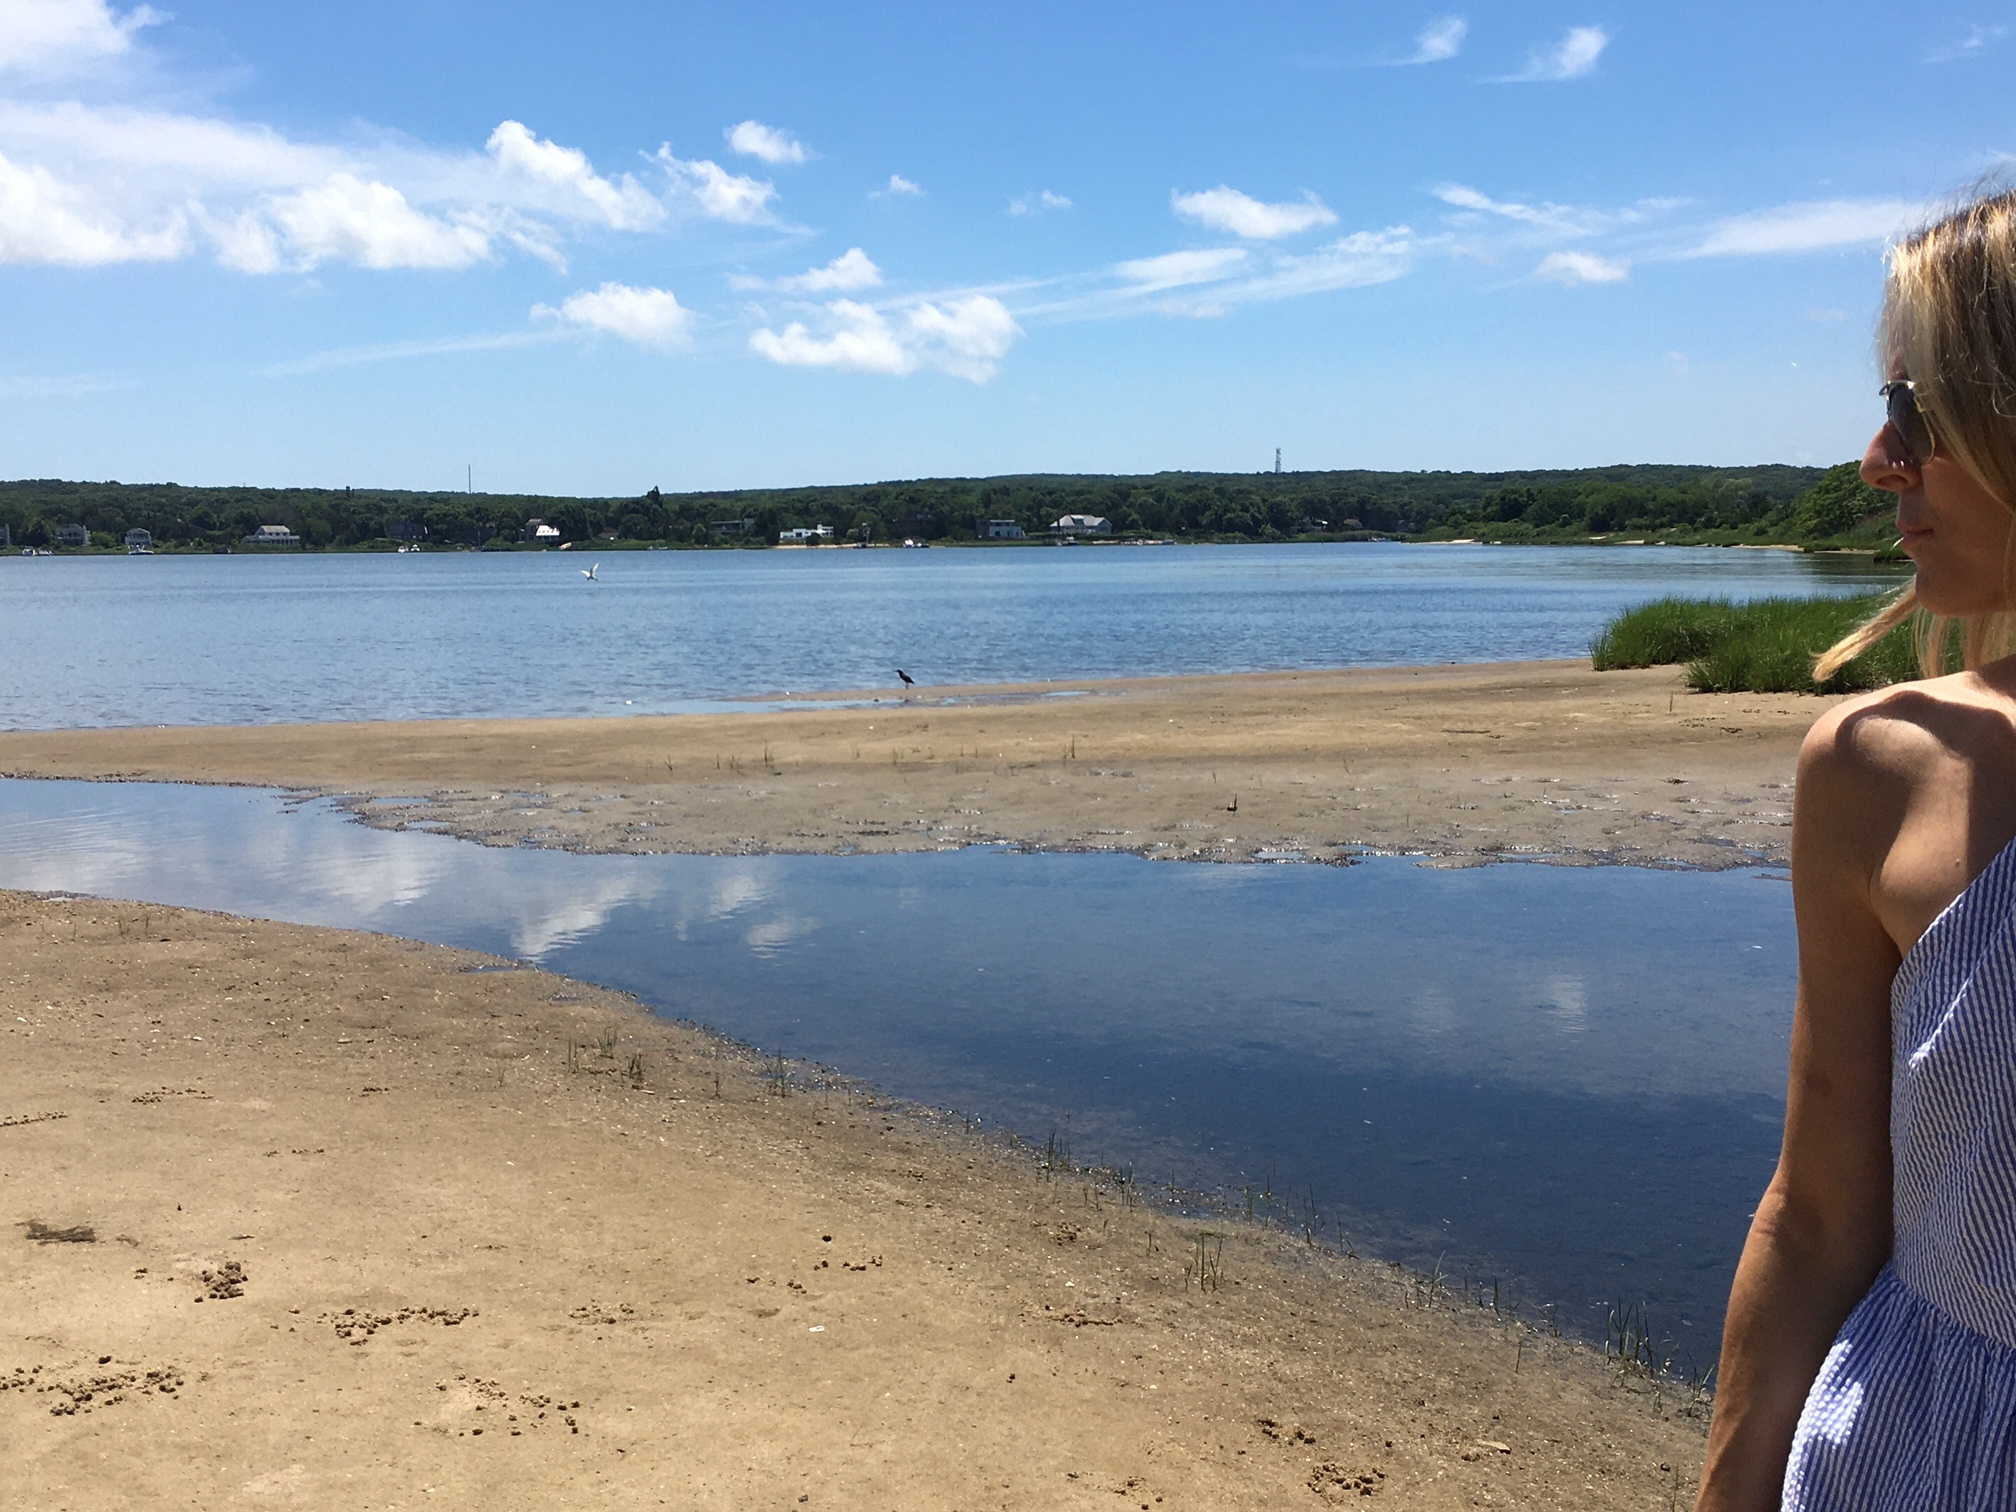 At low tide, you can walk across the canal off Cliff Drive in Sag Harbor, according to neighbor Tiffany Gavin.     KITTY MERRILL